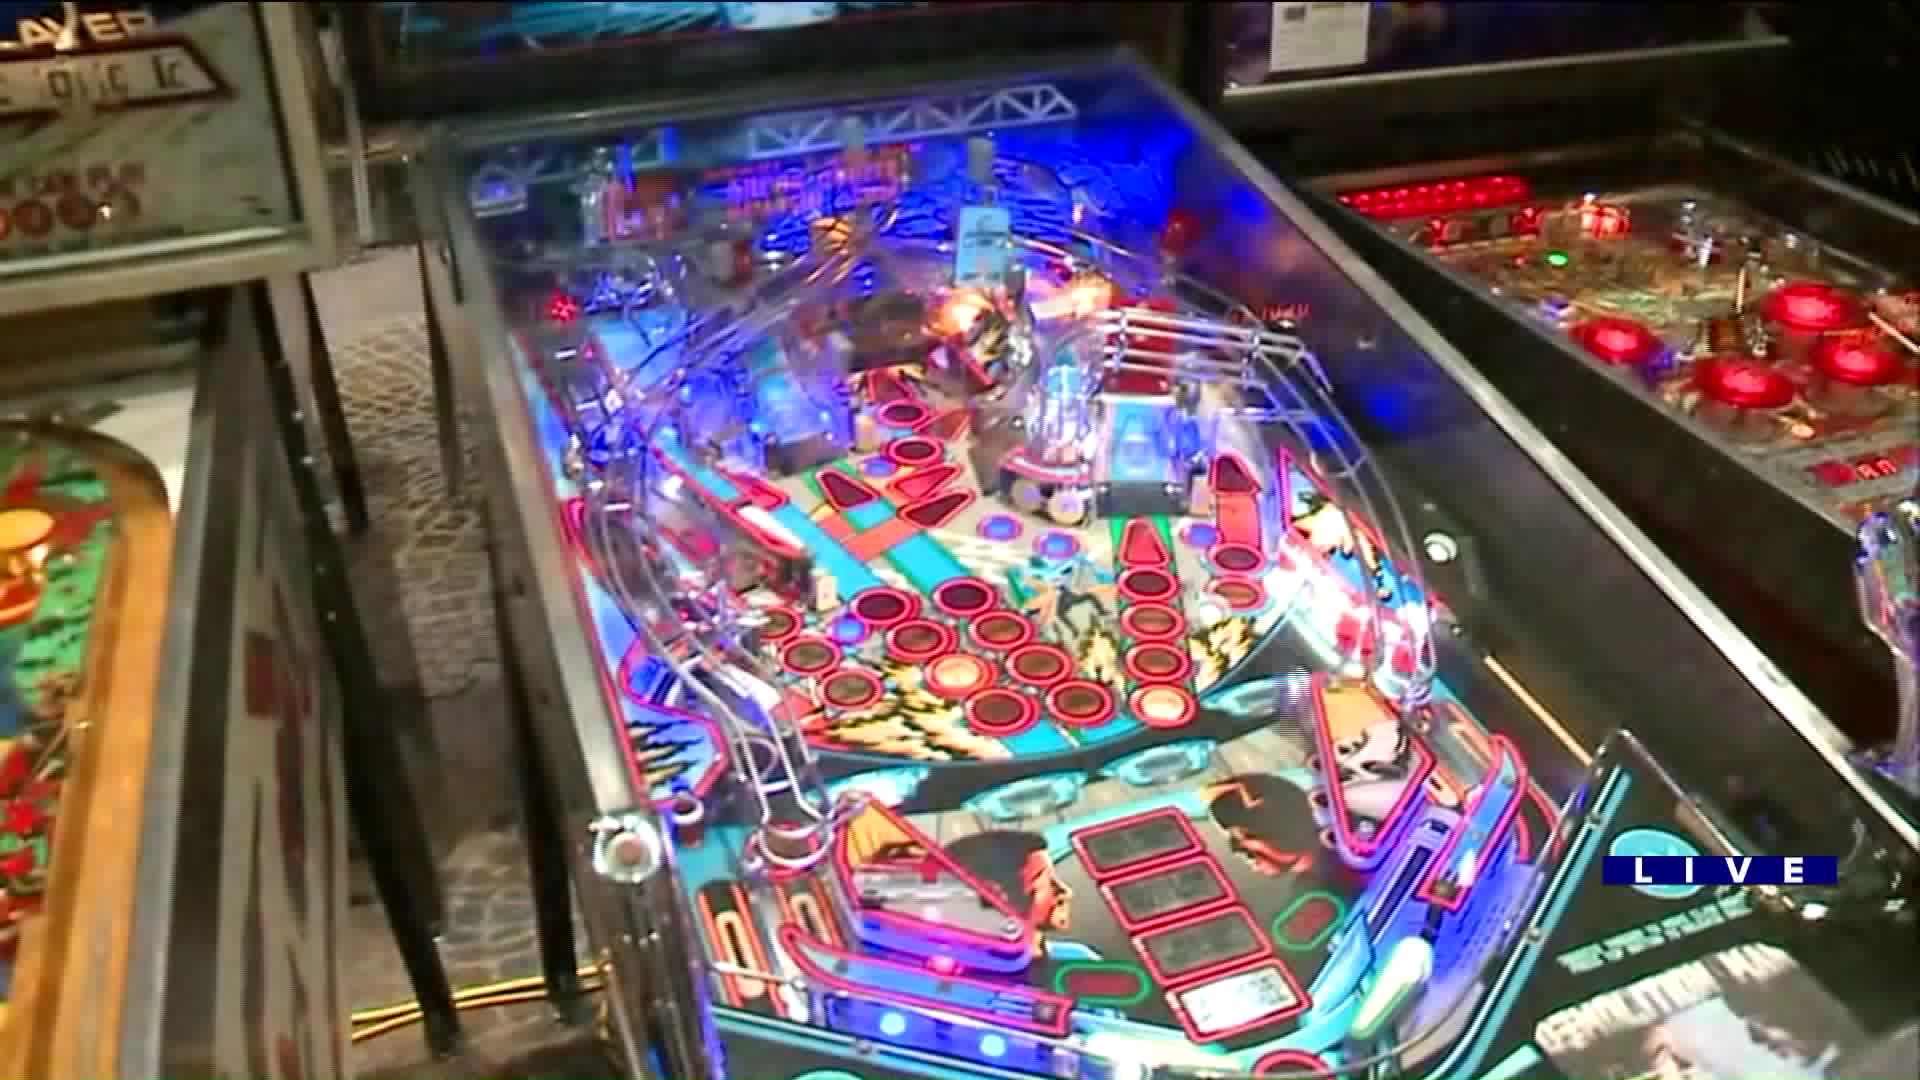 Around Town visits the 34th Annual Pinball Expo